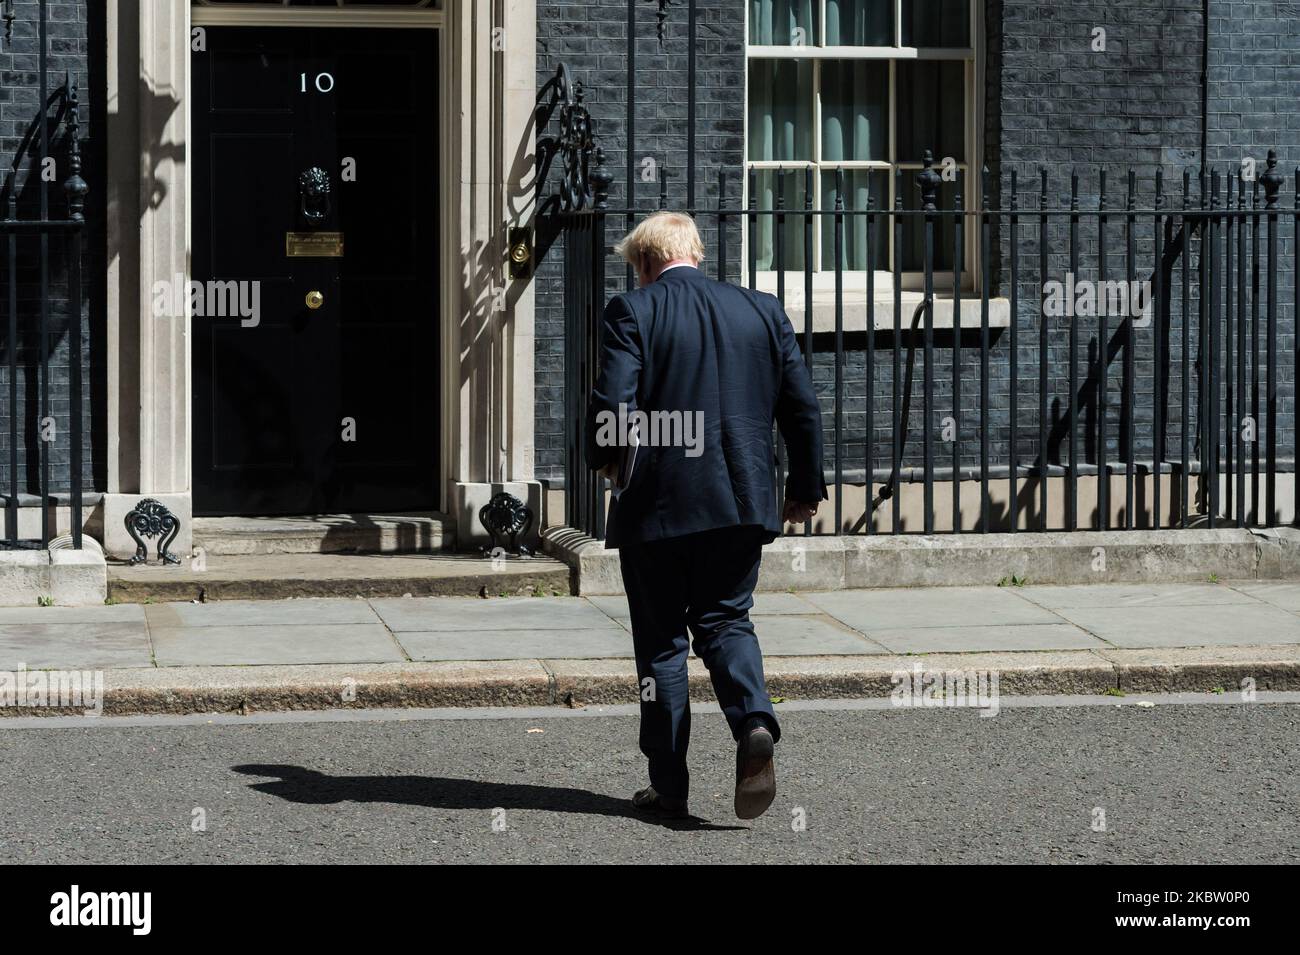 British Prime Minister Boris Johnson arrives at 10 Downing Street in central London after chairing a Cabinet meeting at the Foreign Office on 21 July 2020 in London, England. Boris Johnson has convened his senior ministers for a first full face-to-face meeting since the start of the Coronavirus lockdown in March as the government encourages more people to return to their workplaces from the 1st of August. (Photo by WIktor Szymanowicz/NurPhoto) Stock Photo